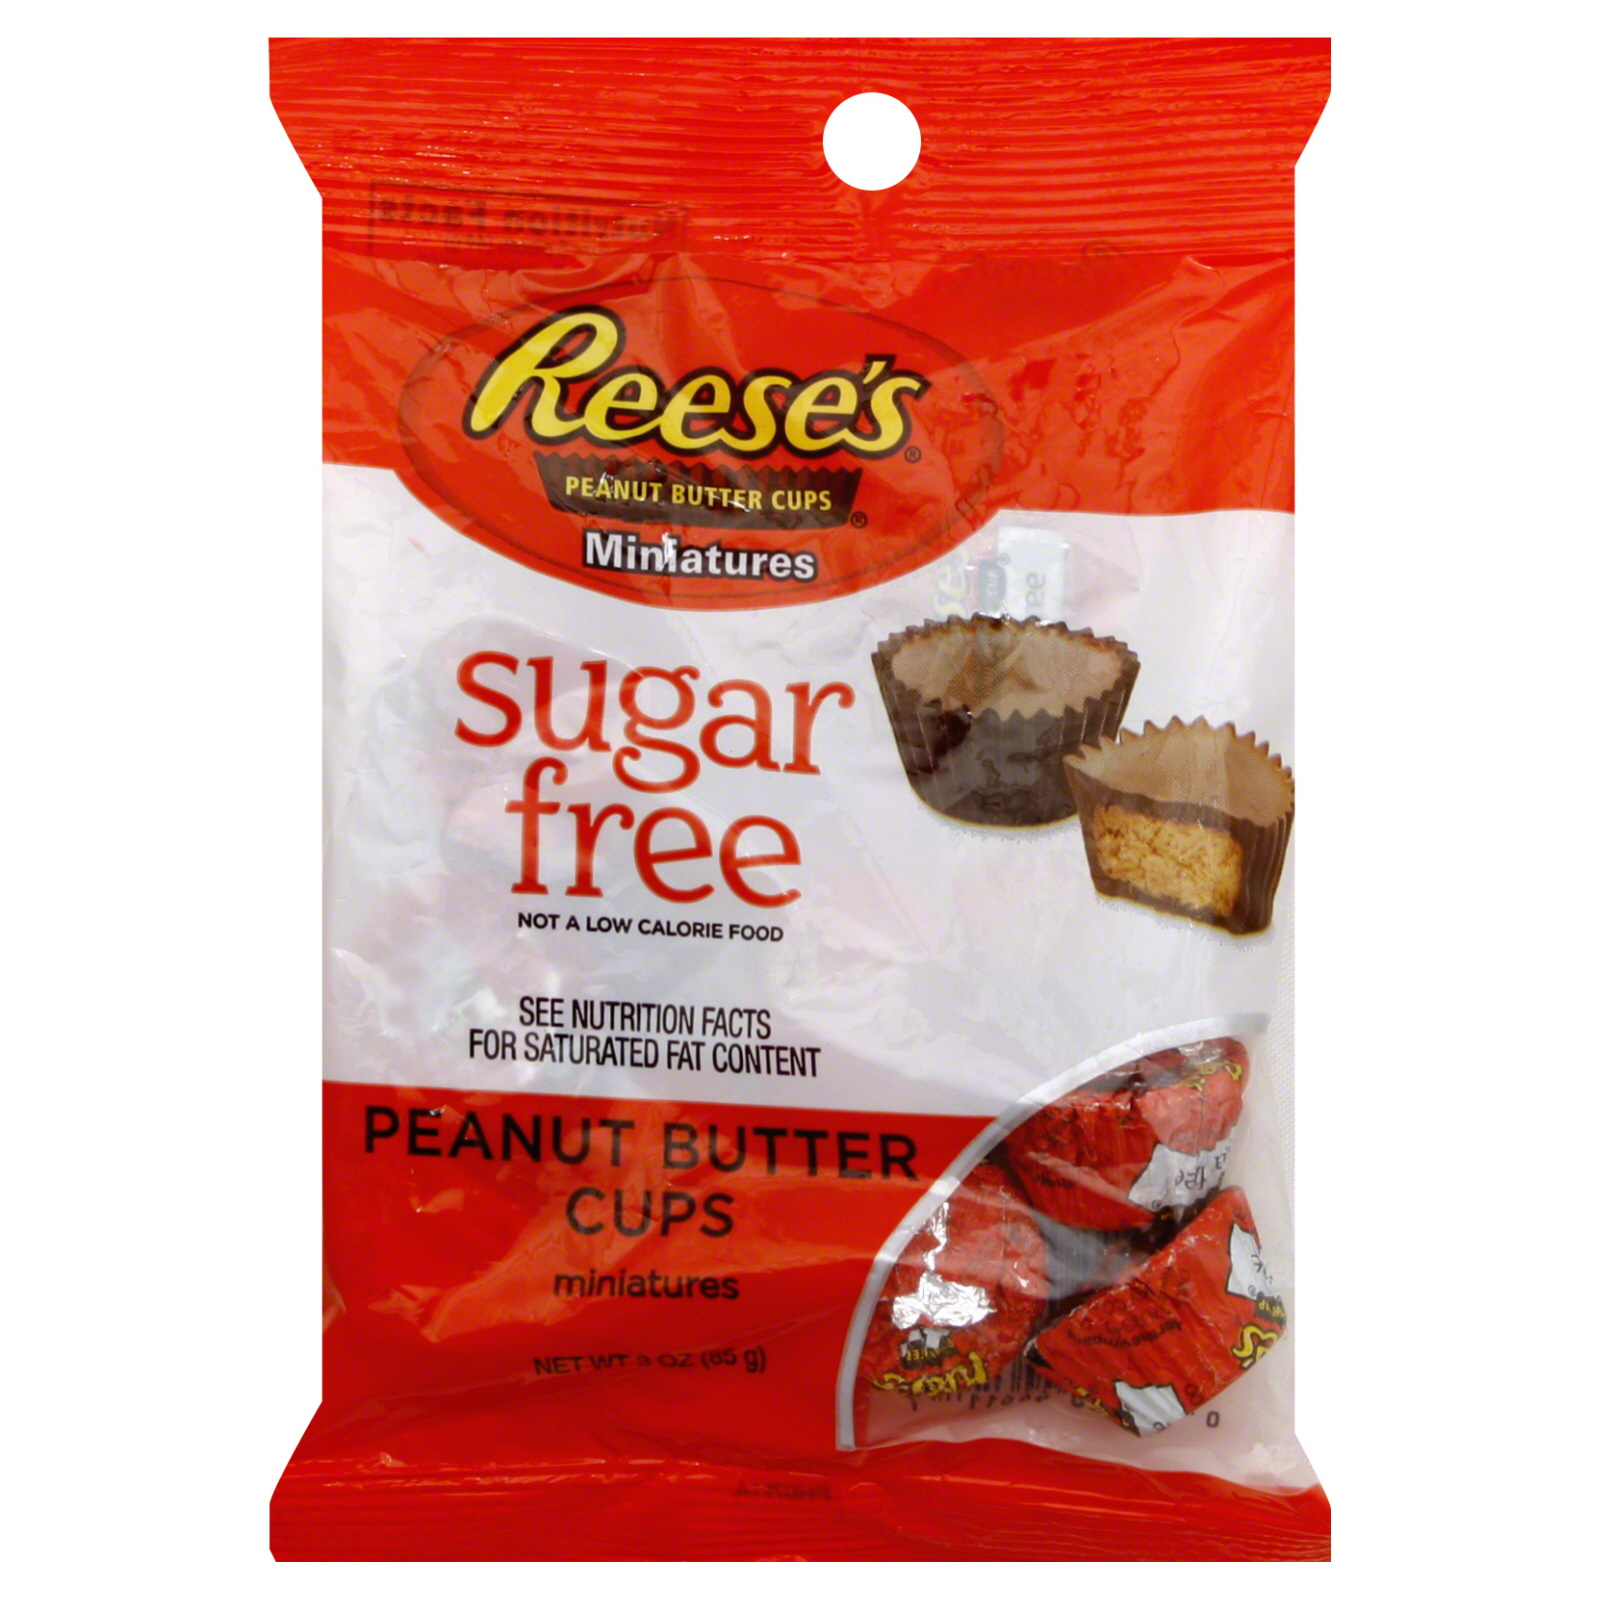 Reese's Peanut Butter Cups, Miniatures, Sugar Free, 3 oz (85 g)